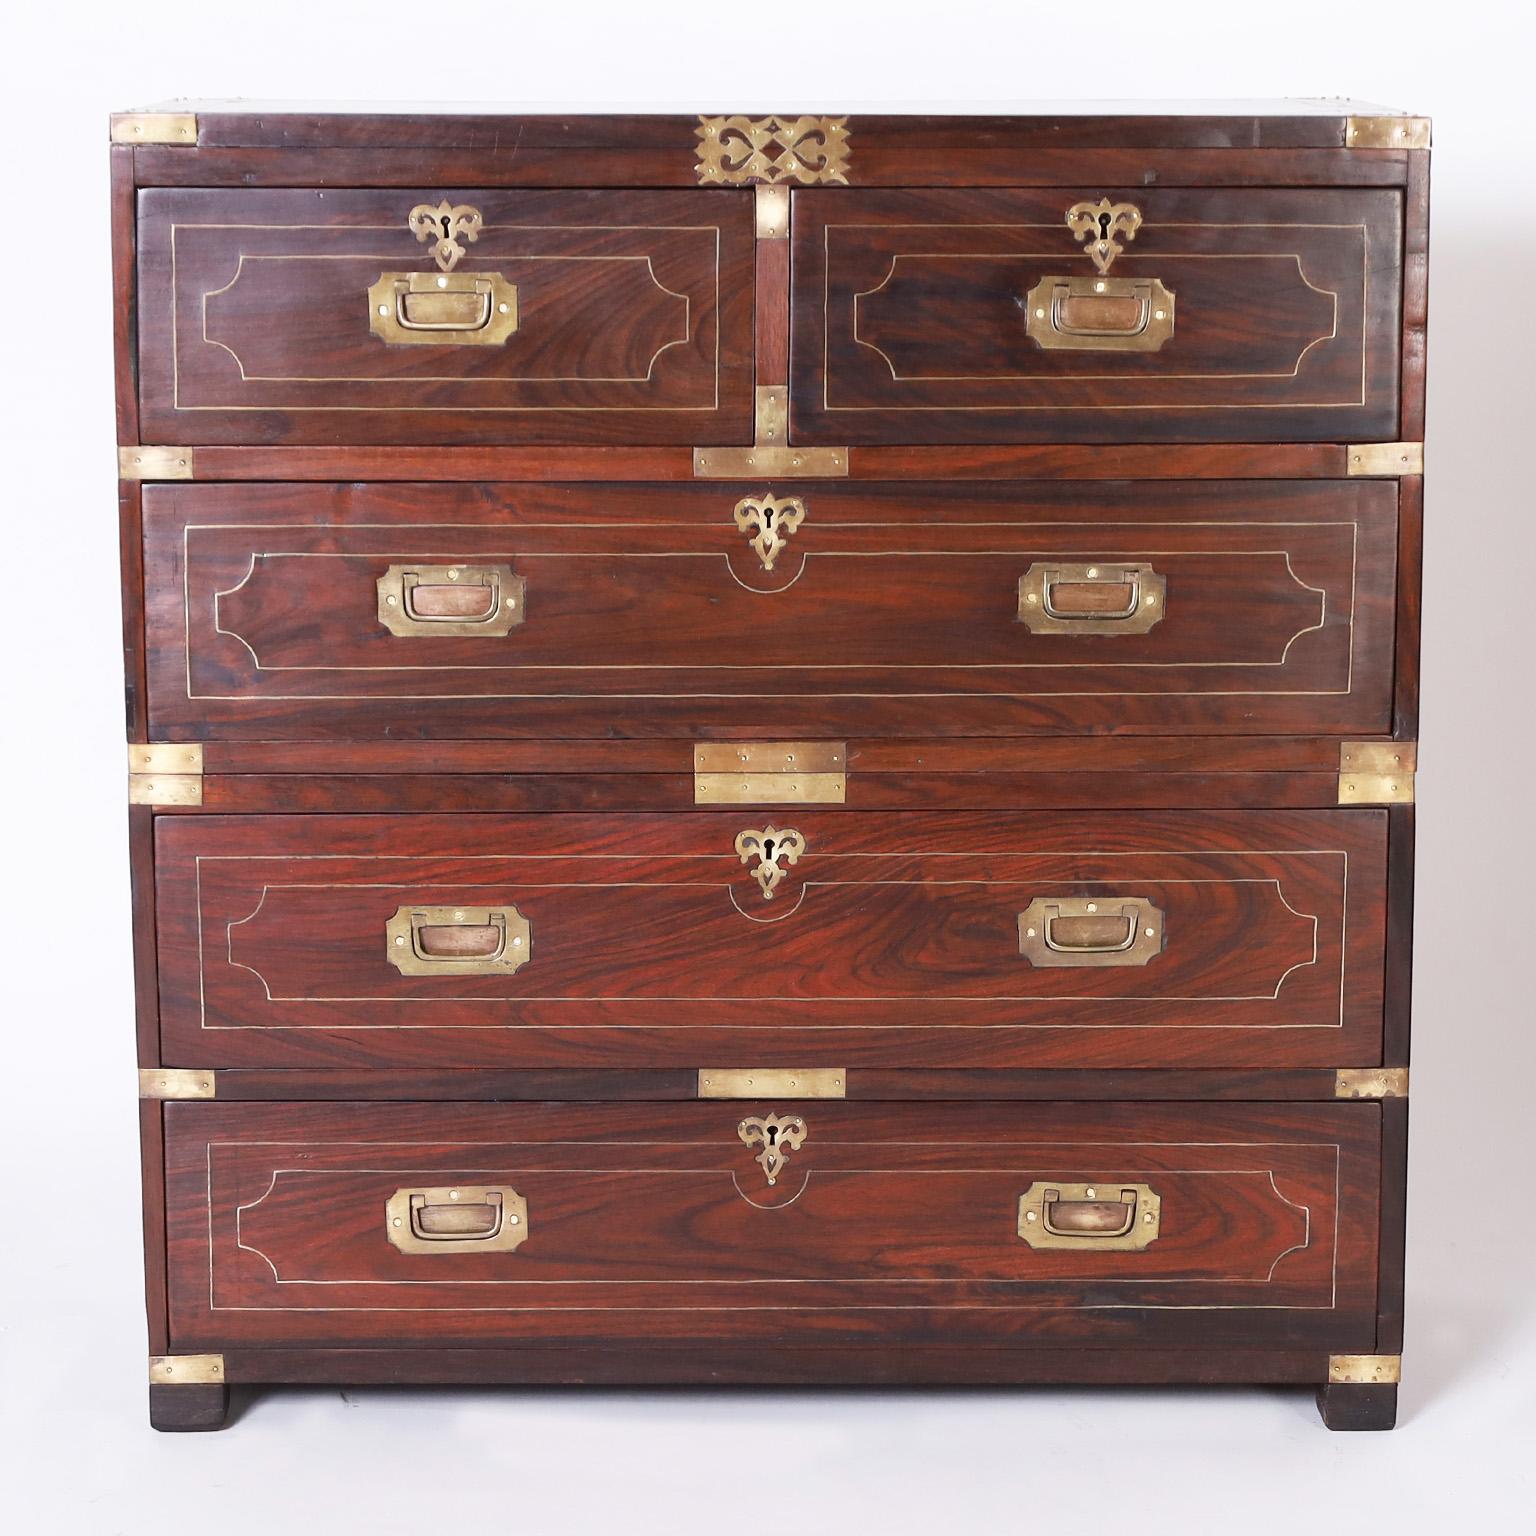 19th century Anglo Indian five drawer chest crafted with rosewood in classic form with a desirable slim profile, featuring brass hardware, geometric string inlays and floral escutcheons.